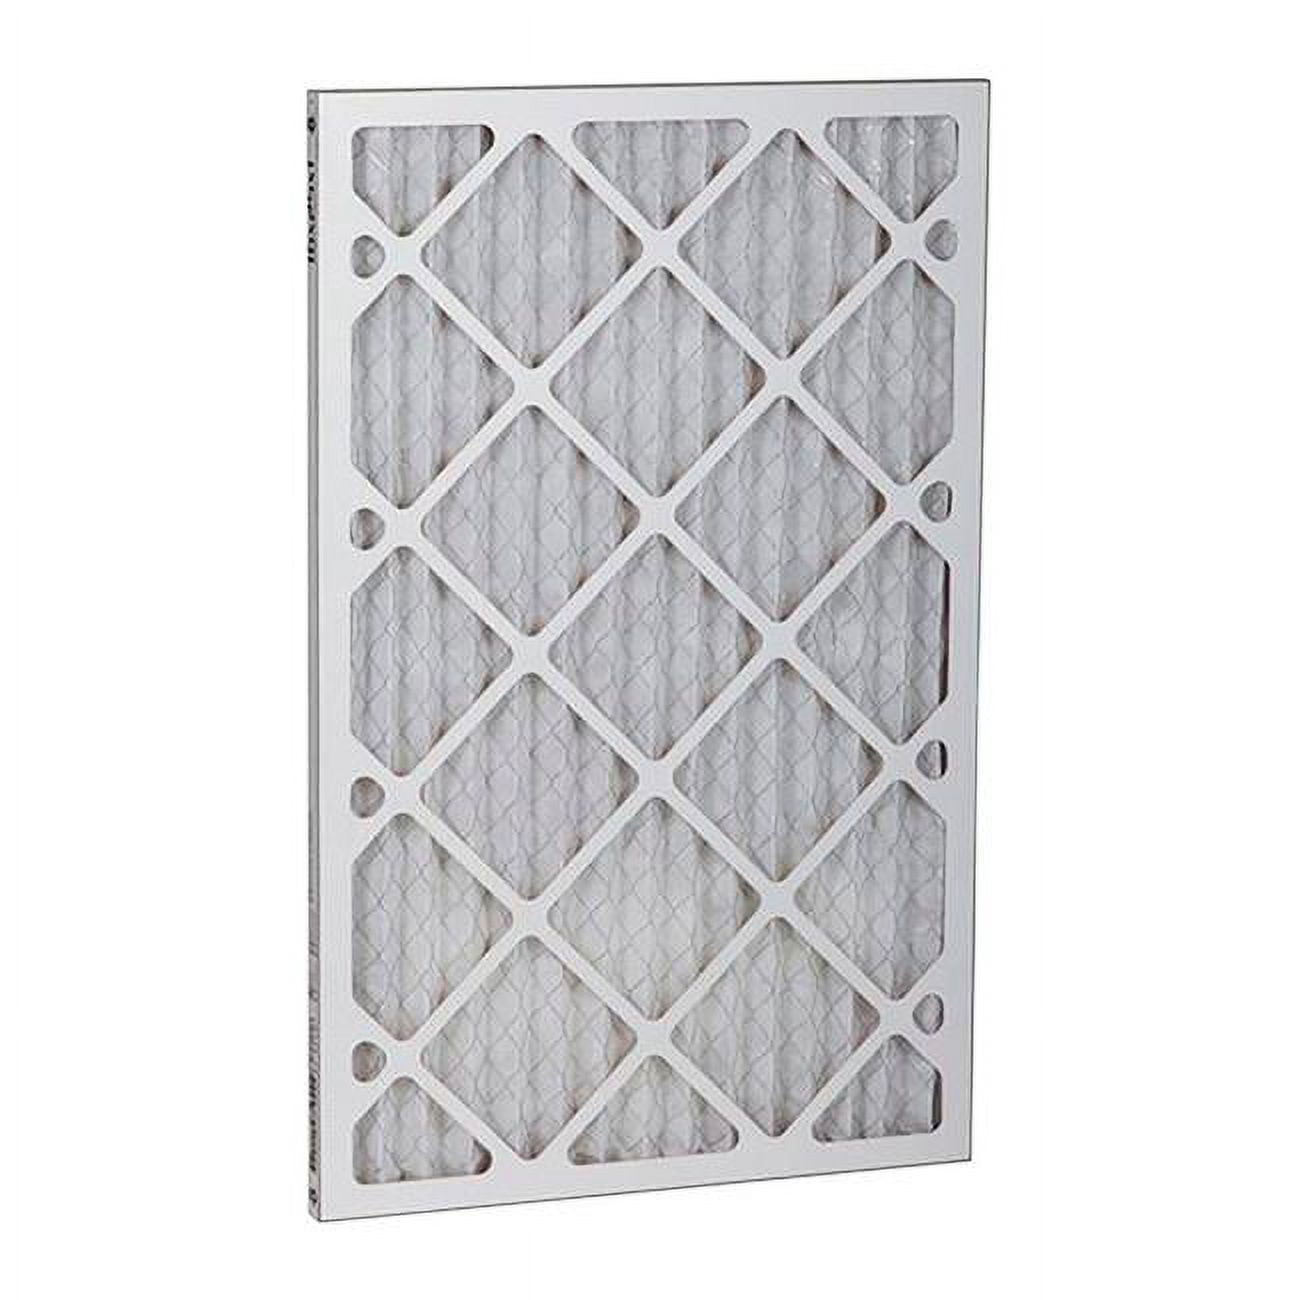 Picture of Best Air 4823068 12 x 24 x 1 in. 8 MERV Air Filter - Case of 12